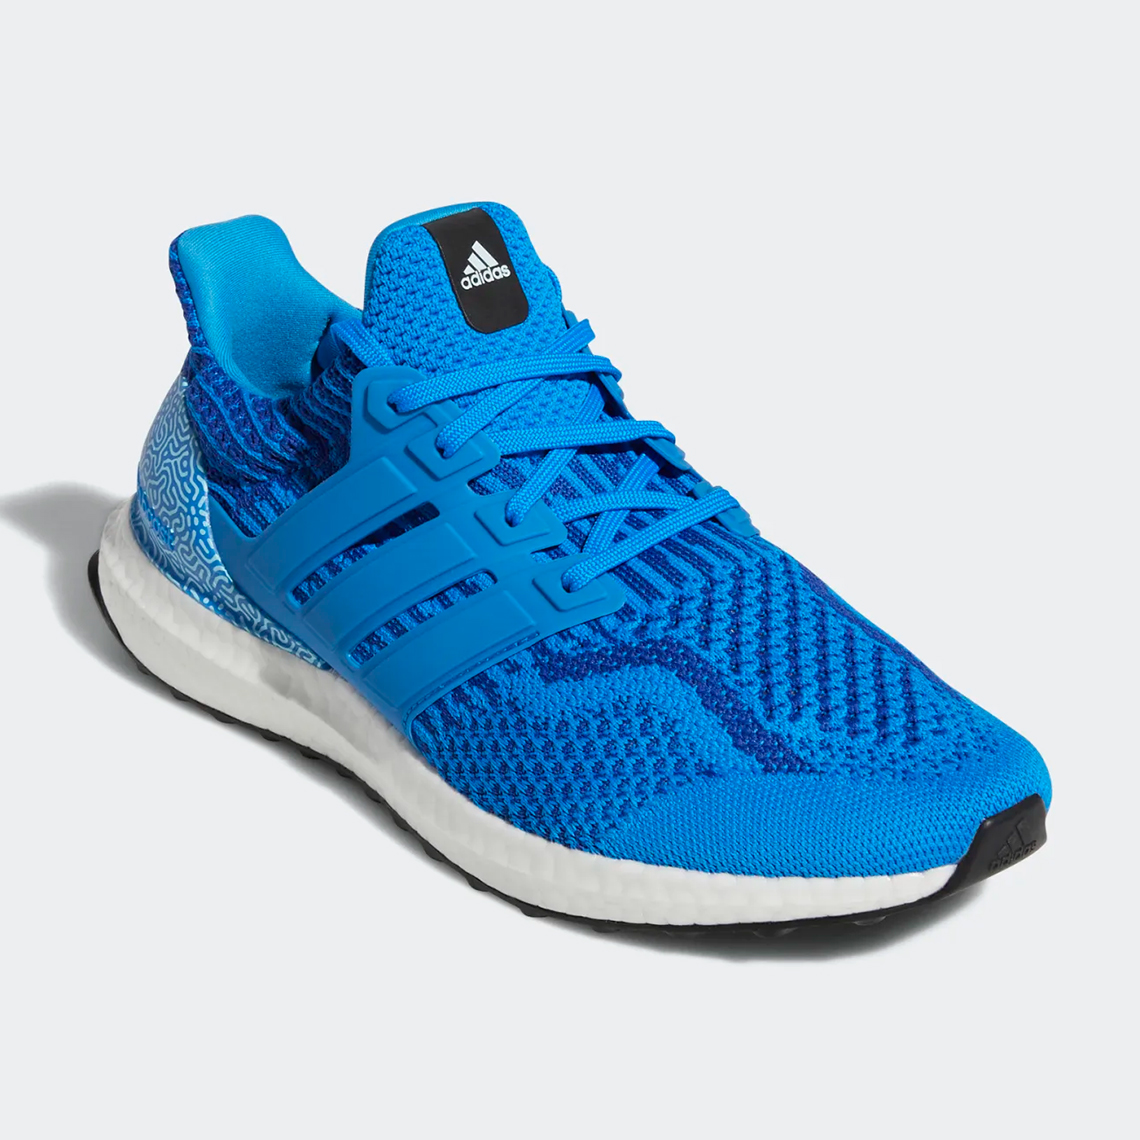 adidas ultraboost dna coral reef pack blue GV8711 1